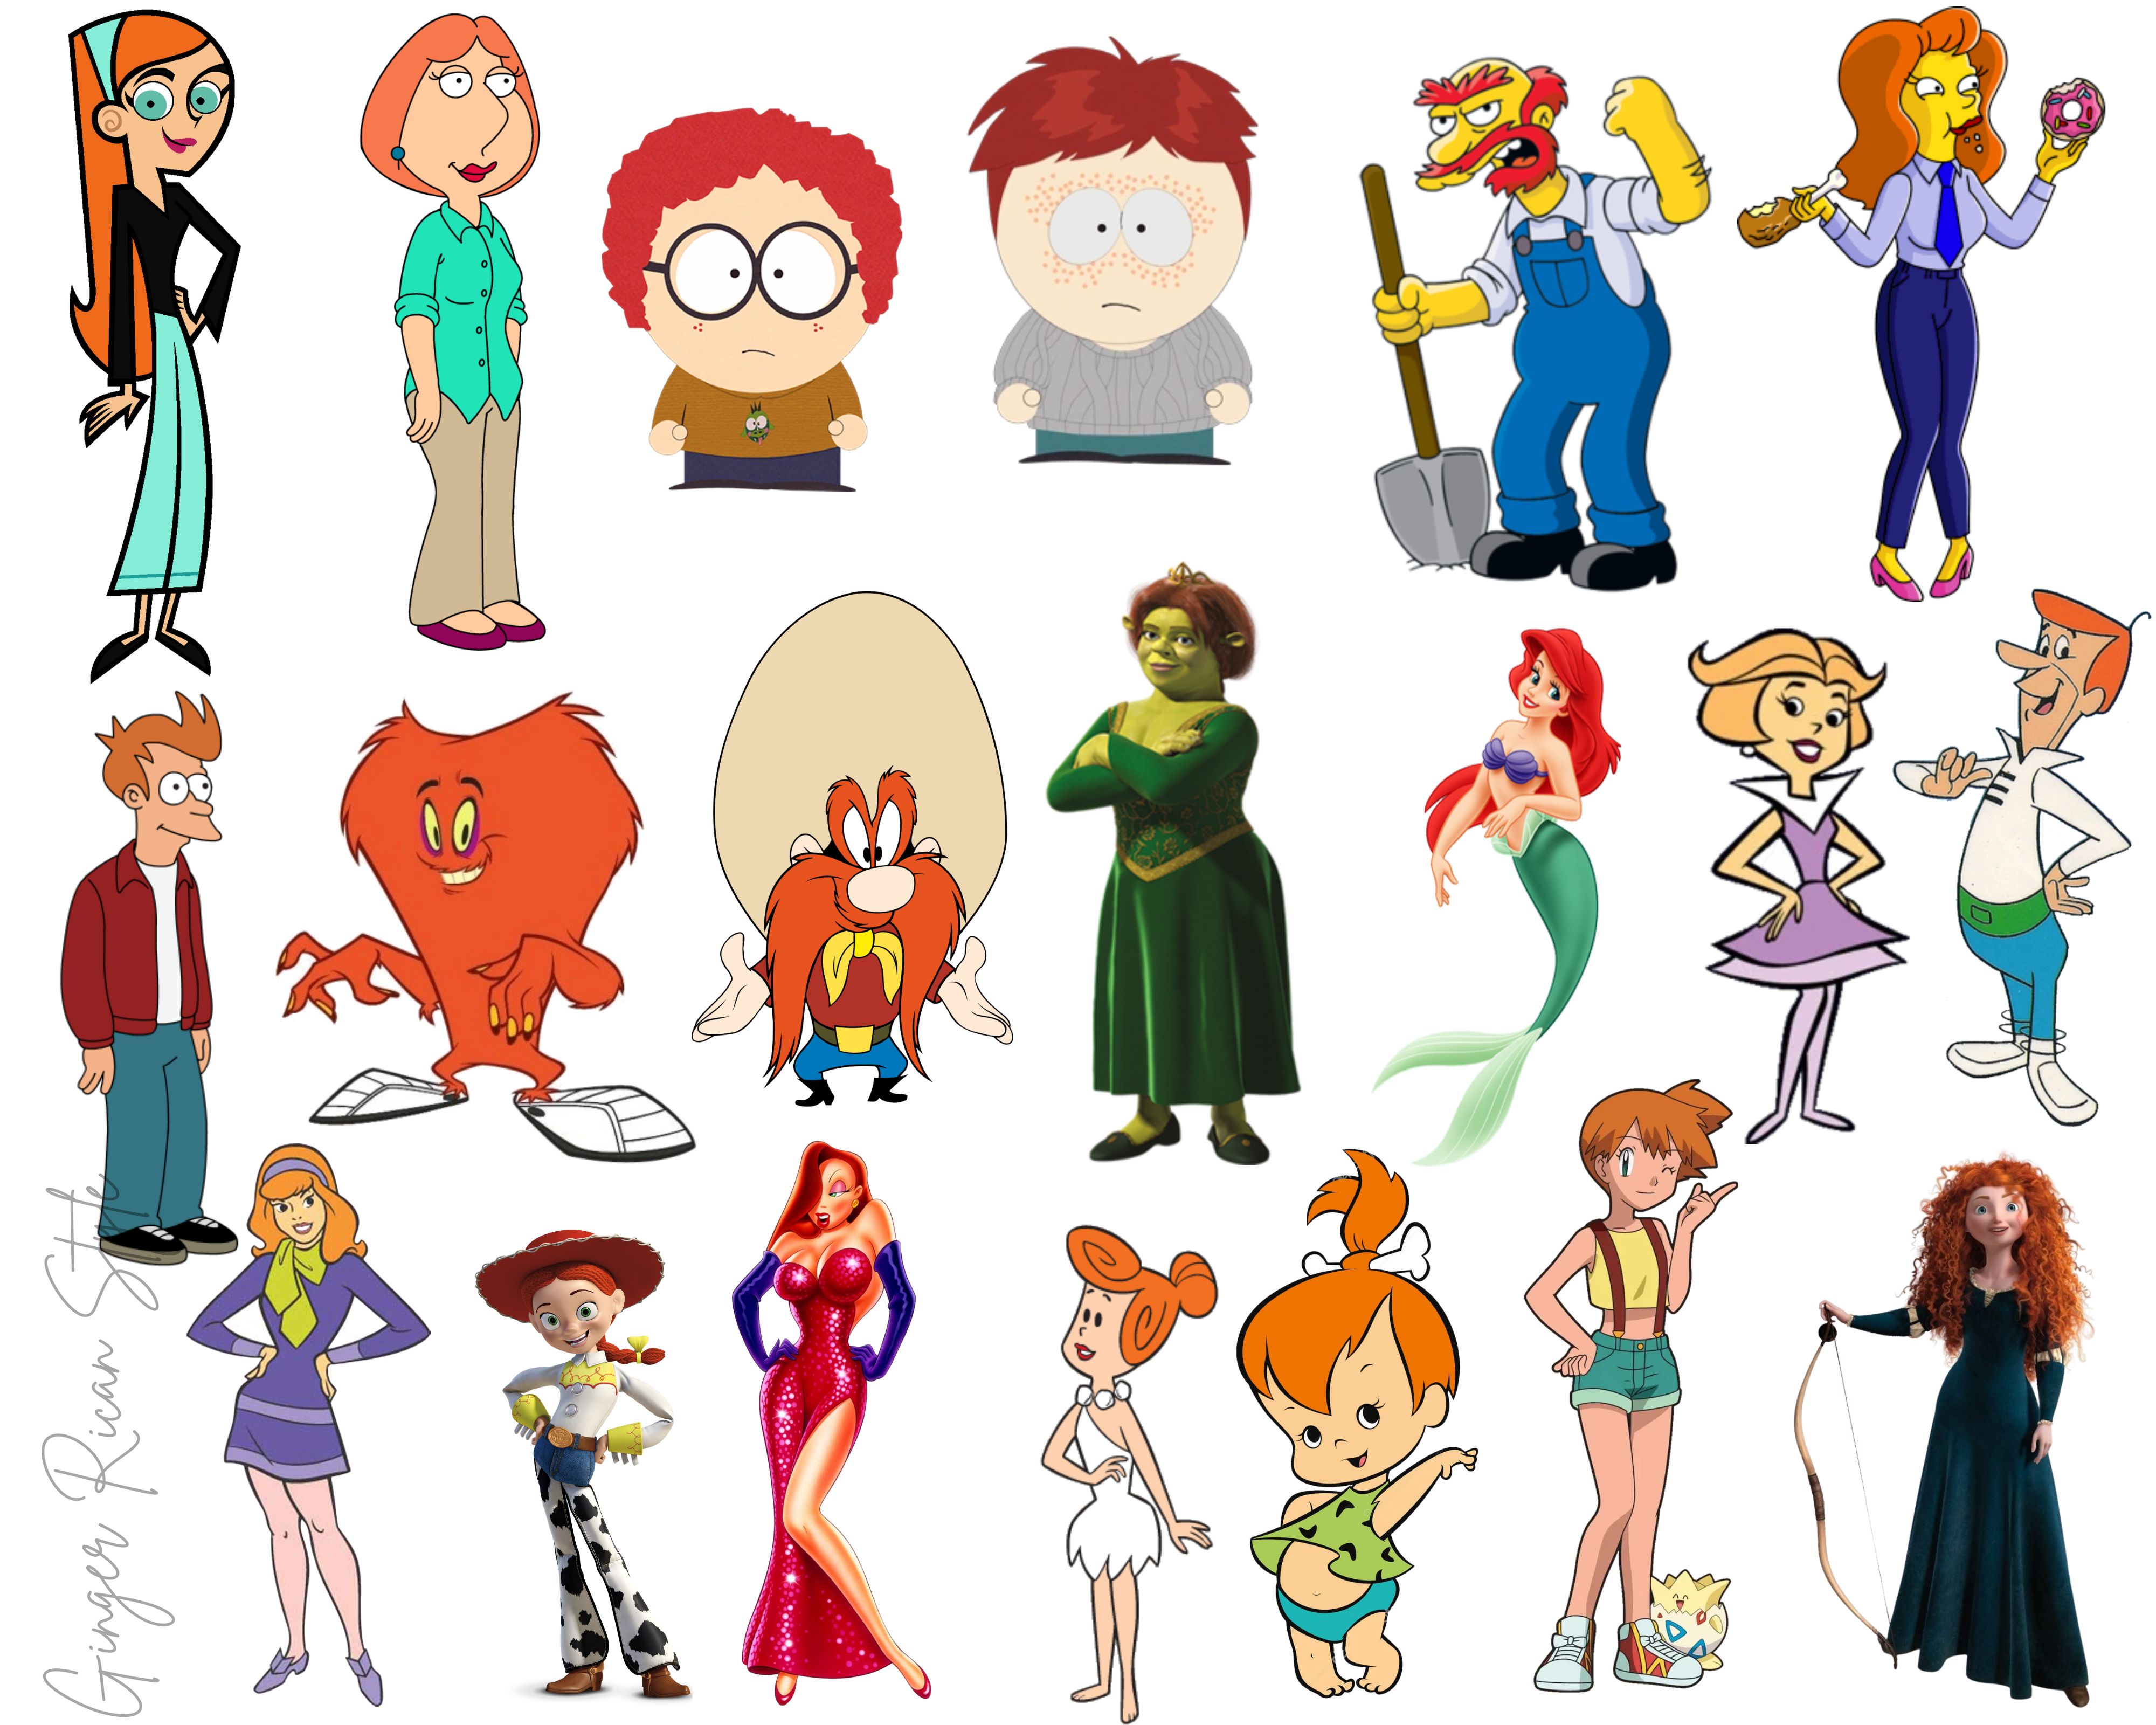 charie padilla recommends red head cartoons pic